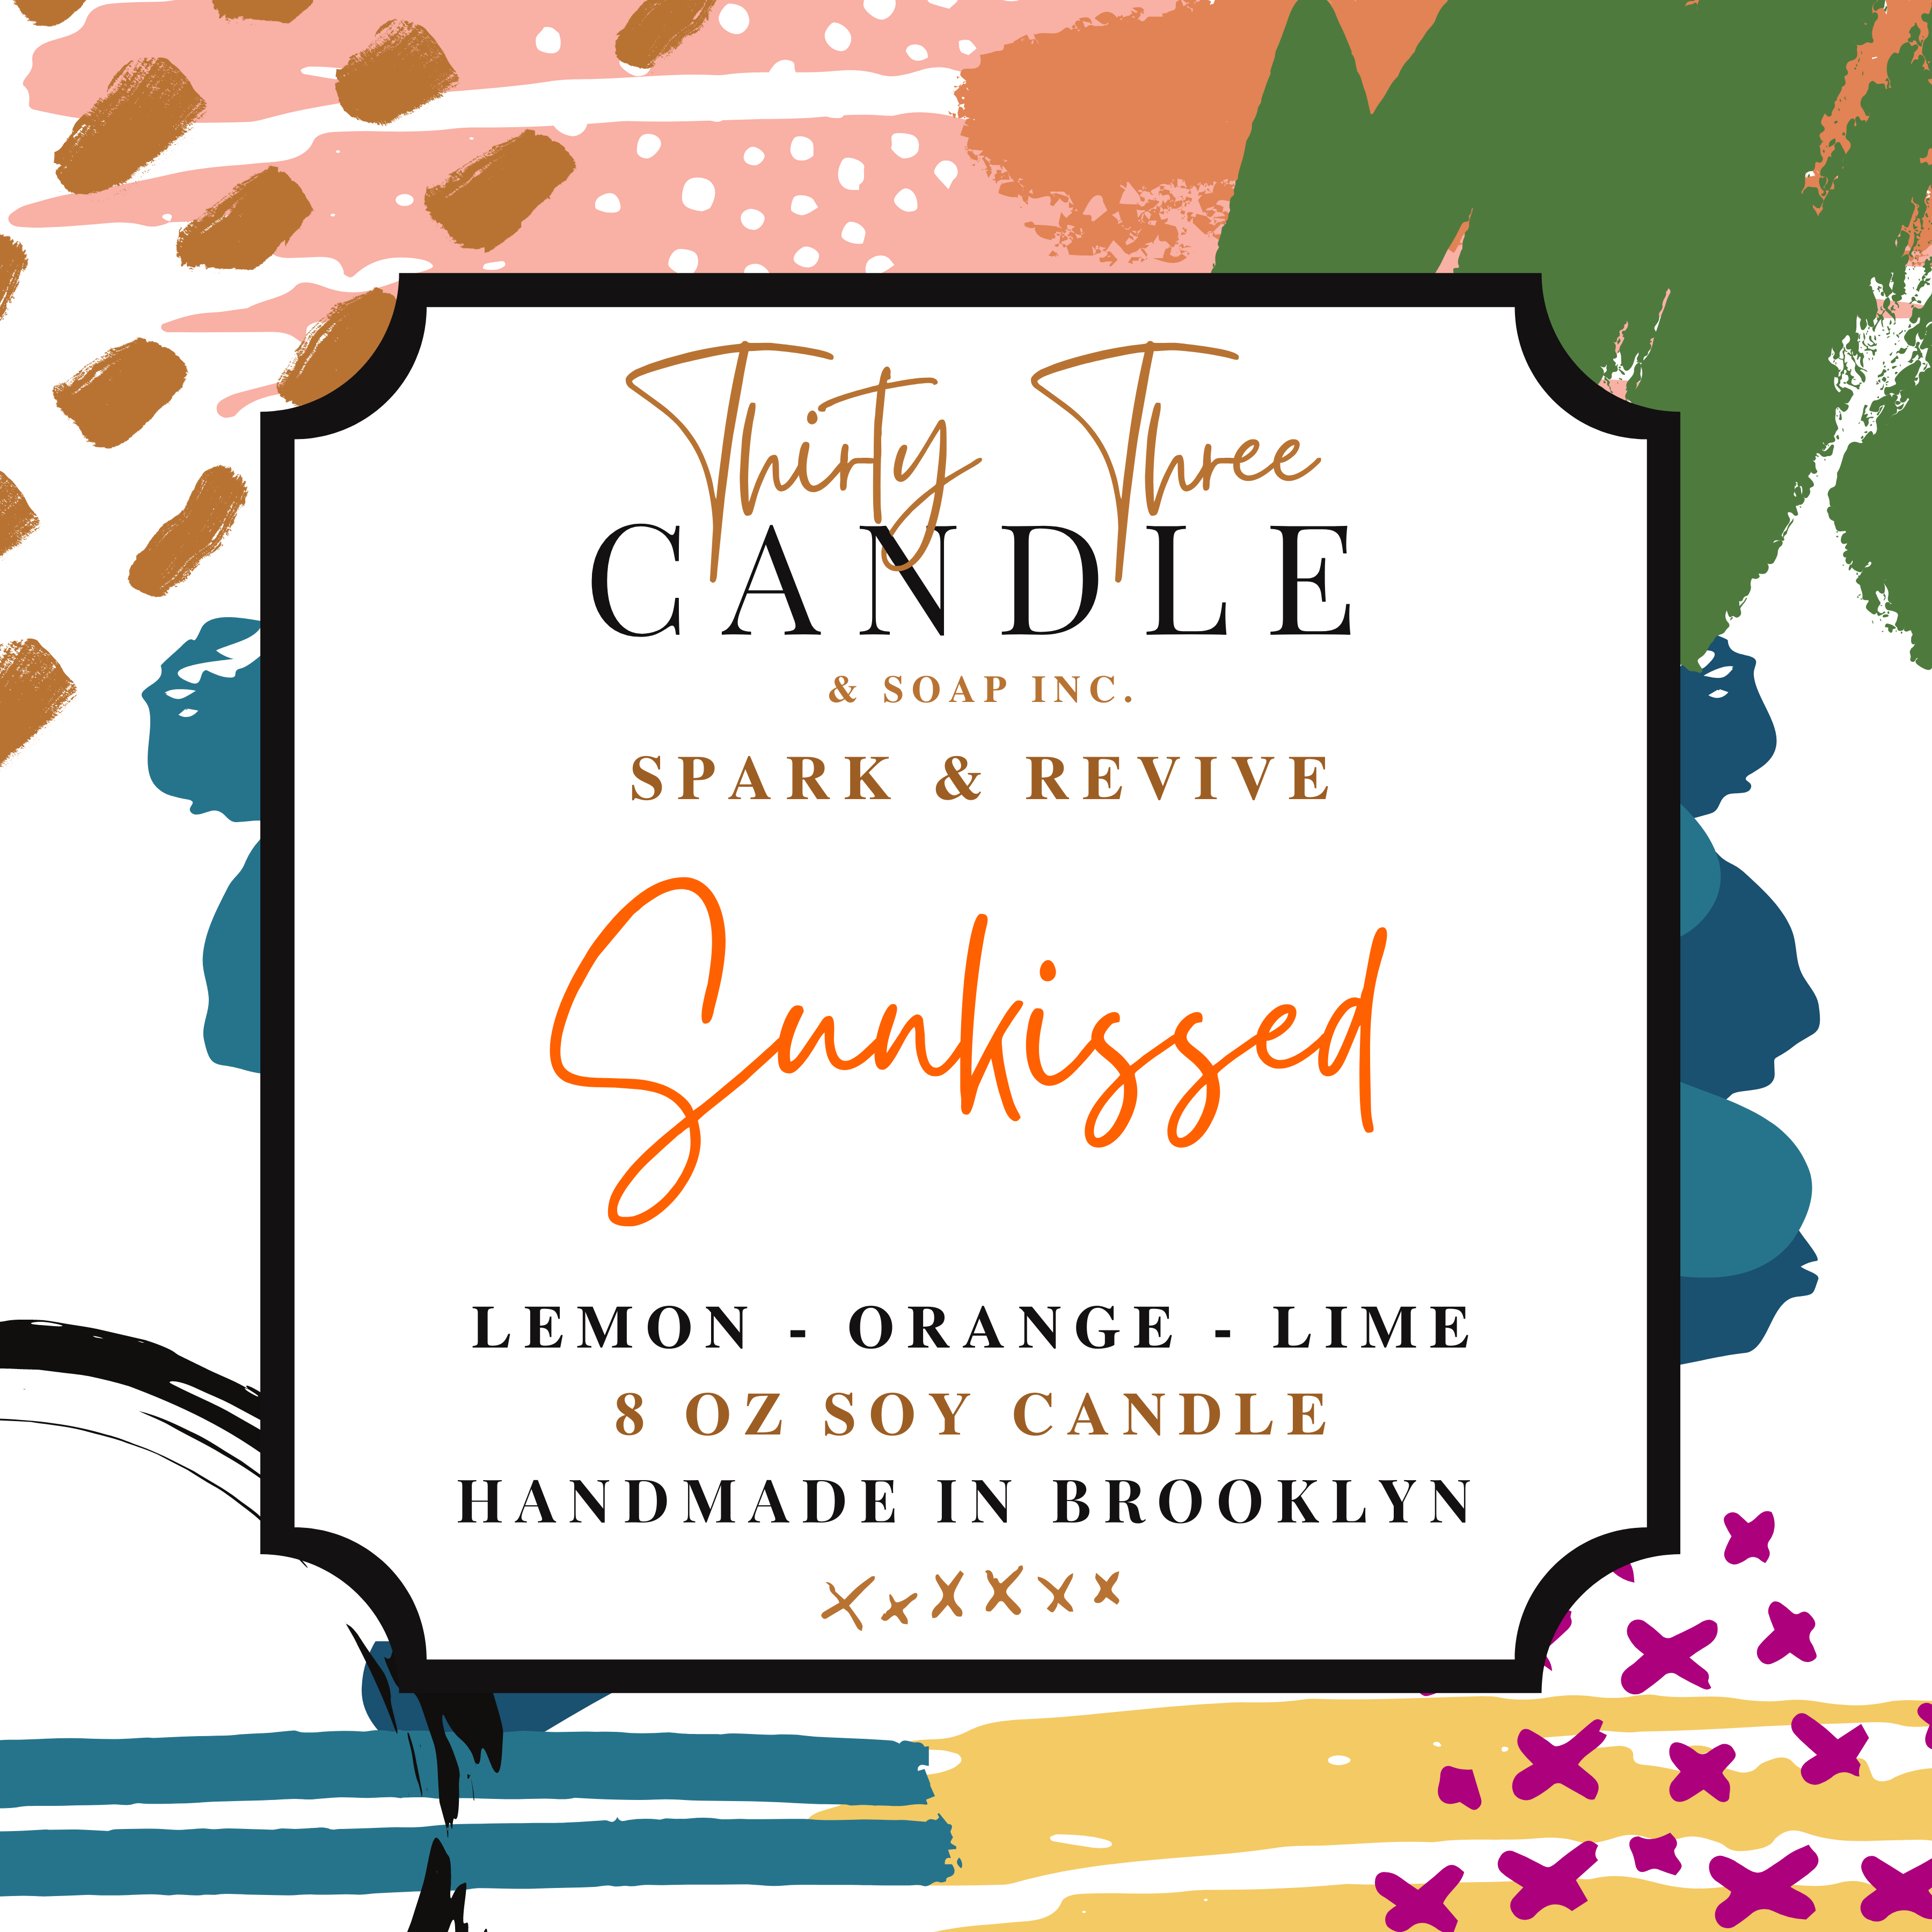 Sunkissed Scented Soy Candle